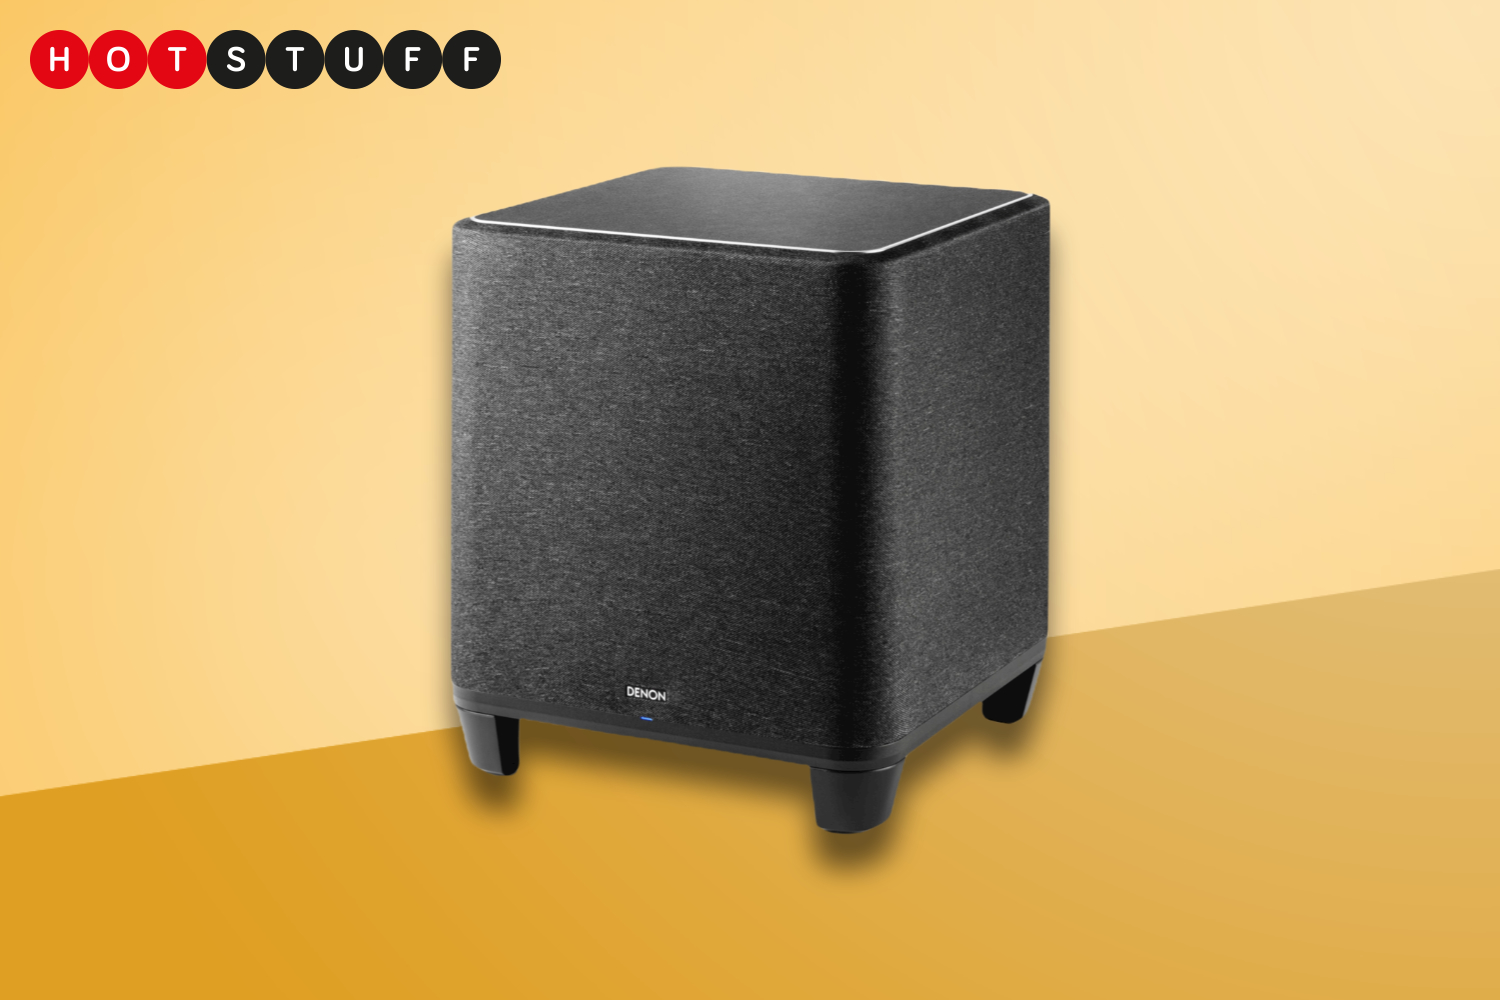 Denon's new wireless subwoofer promises to add deep bass to your